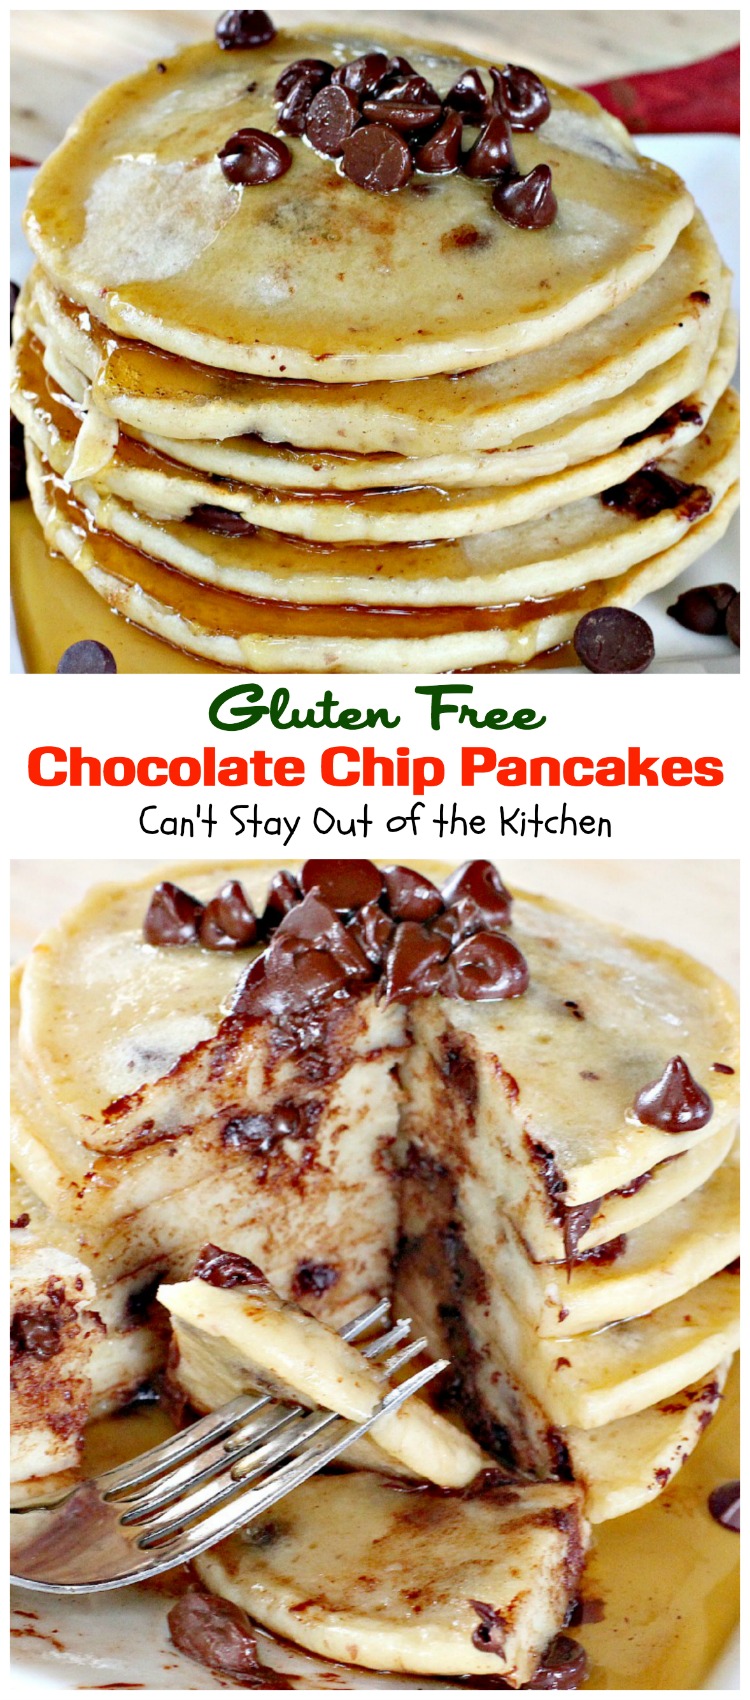 Gluten Free Chocolate Chip Pancakes | Can't Stay Out of the Kitchen